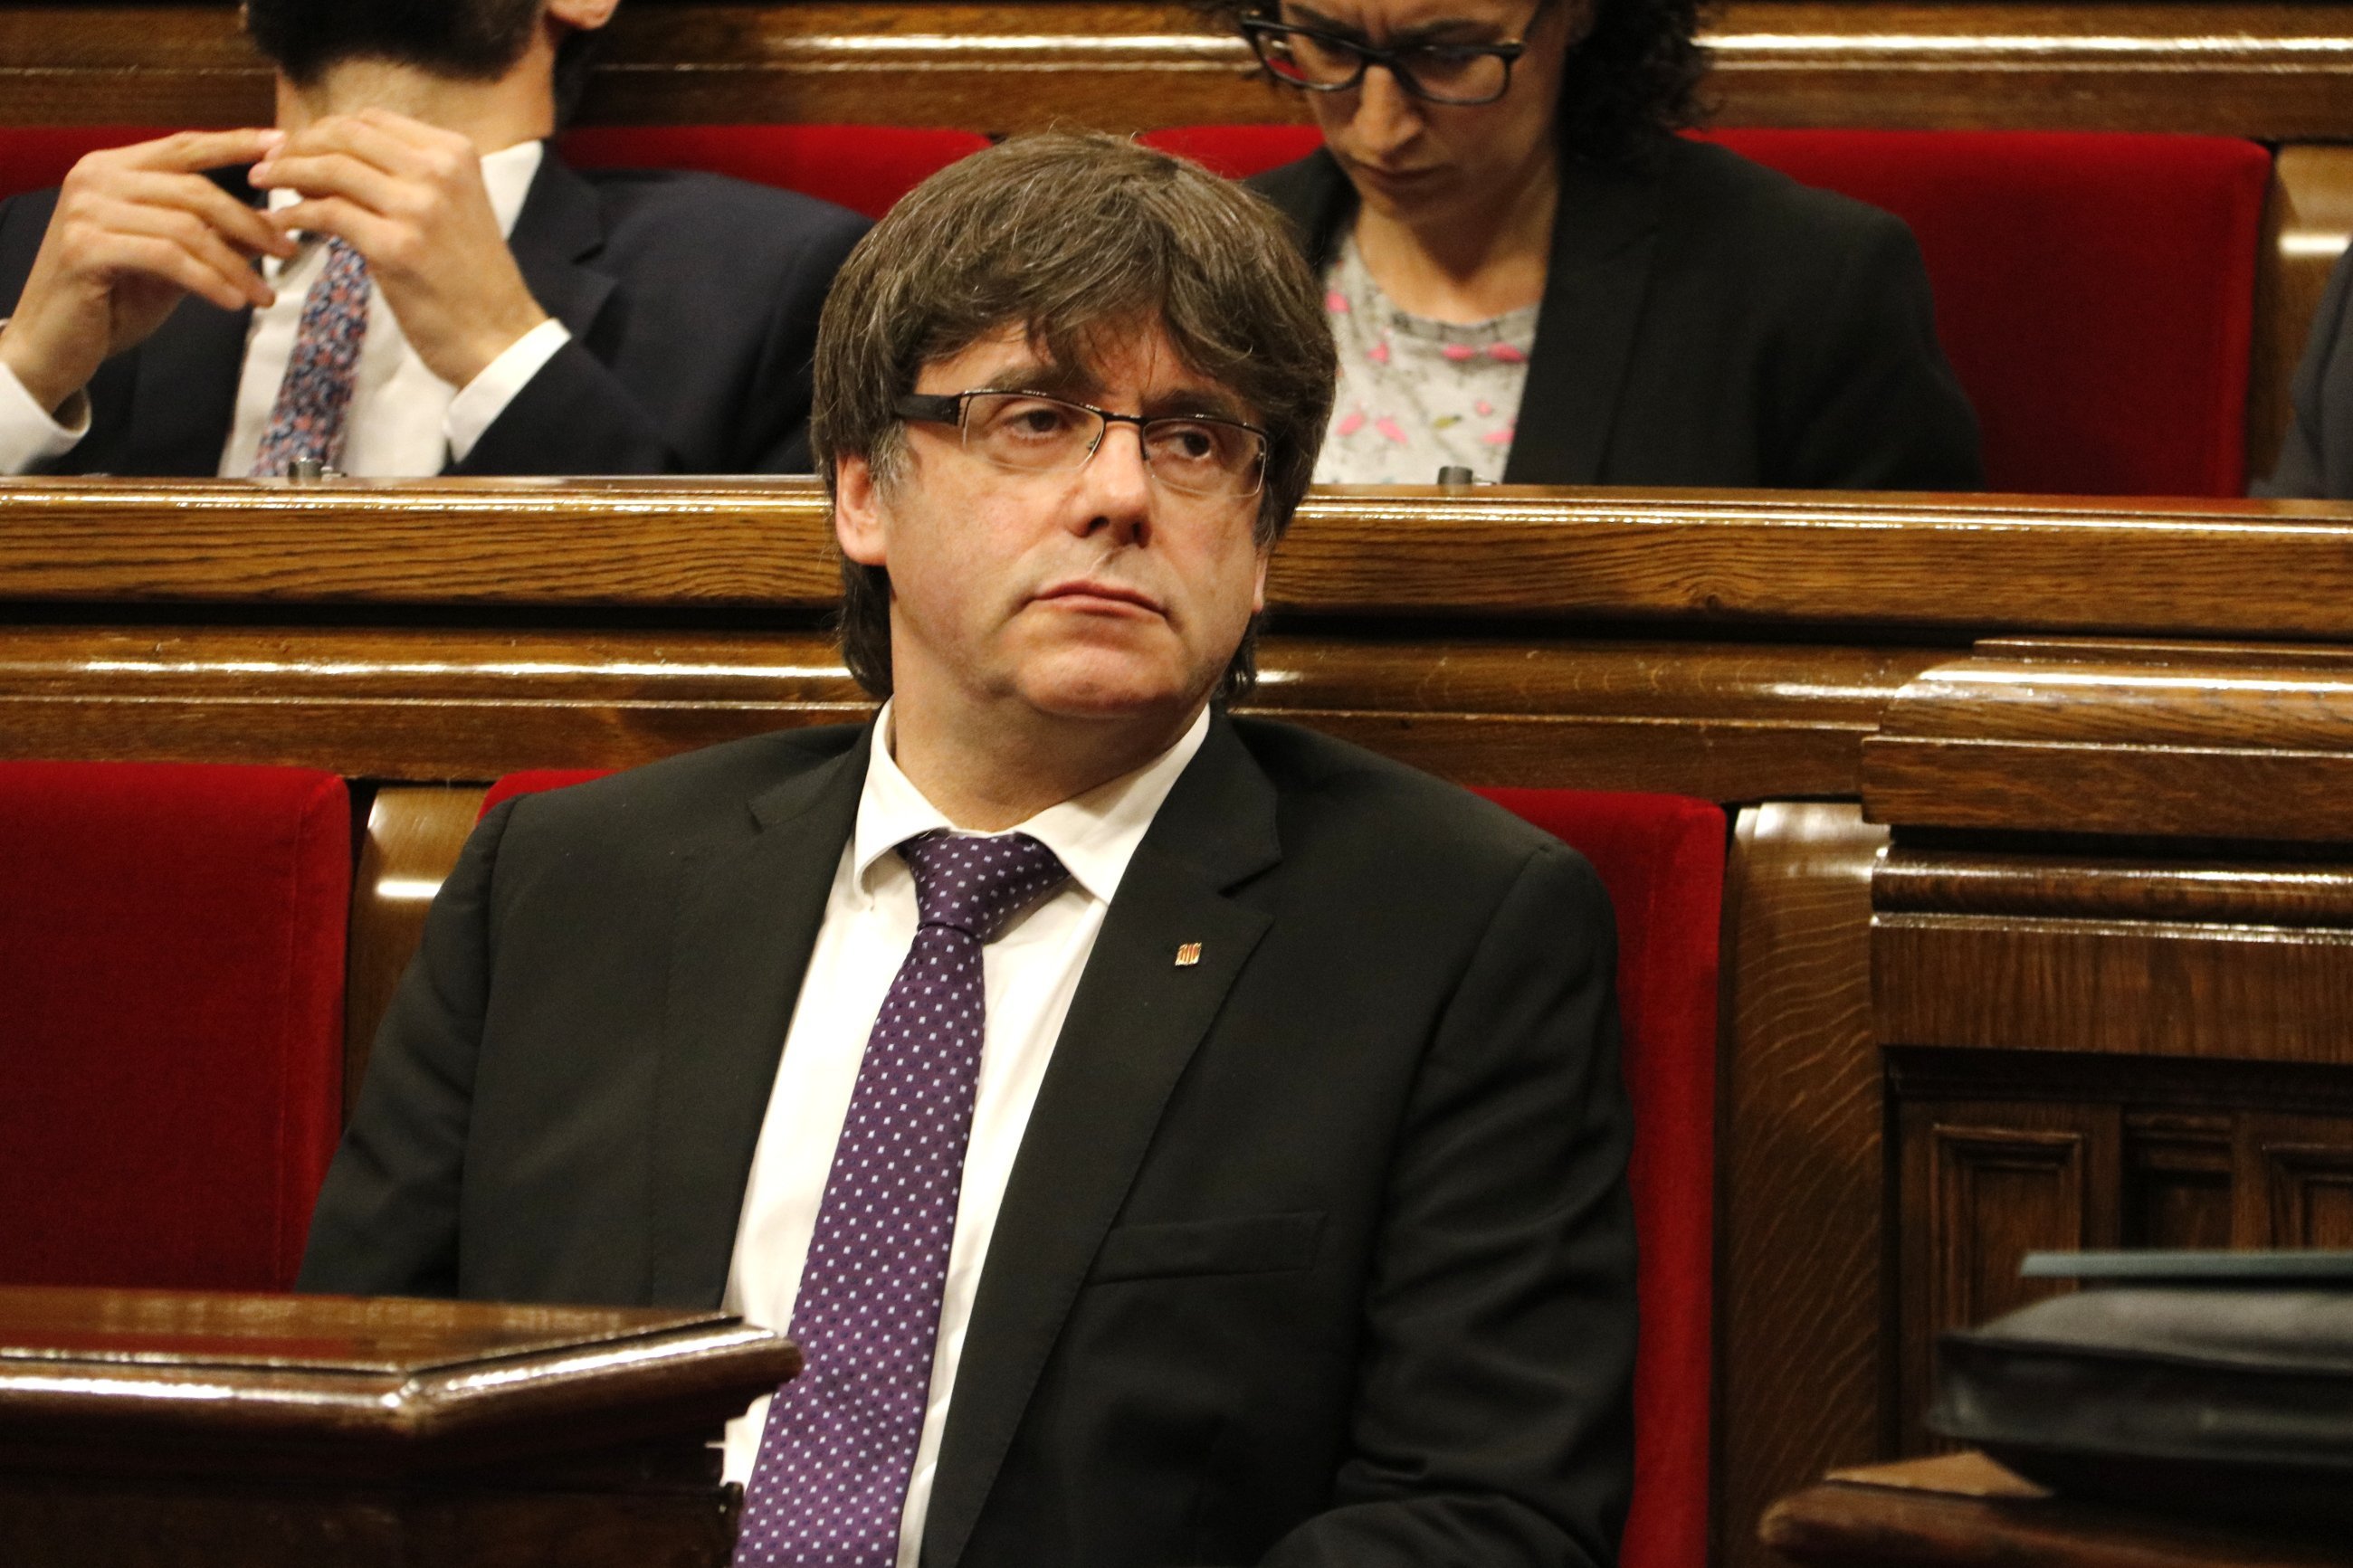 Catalan intellectuals call for Puigdemont to be sworn in as president